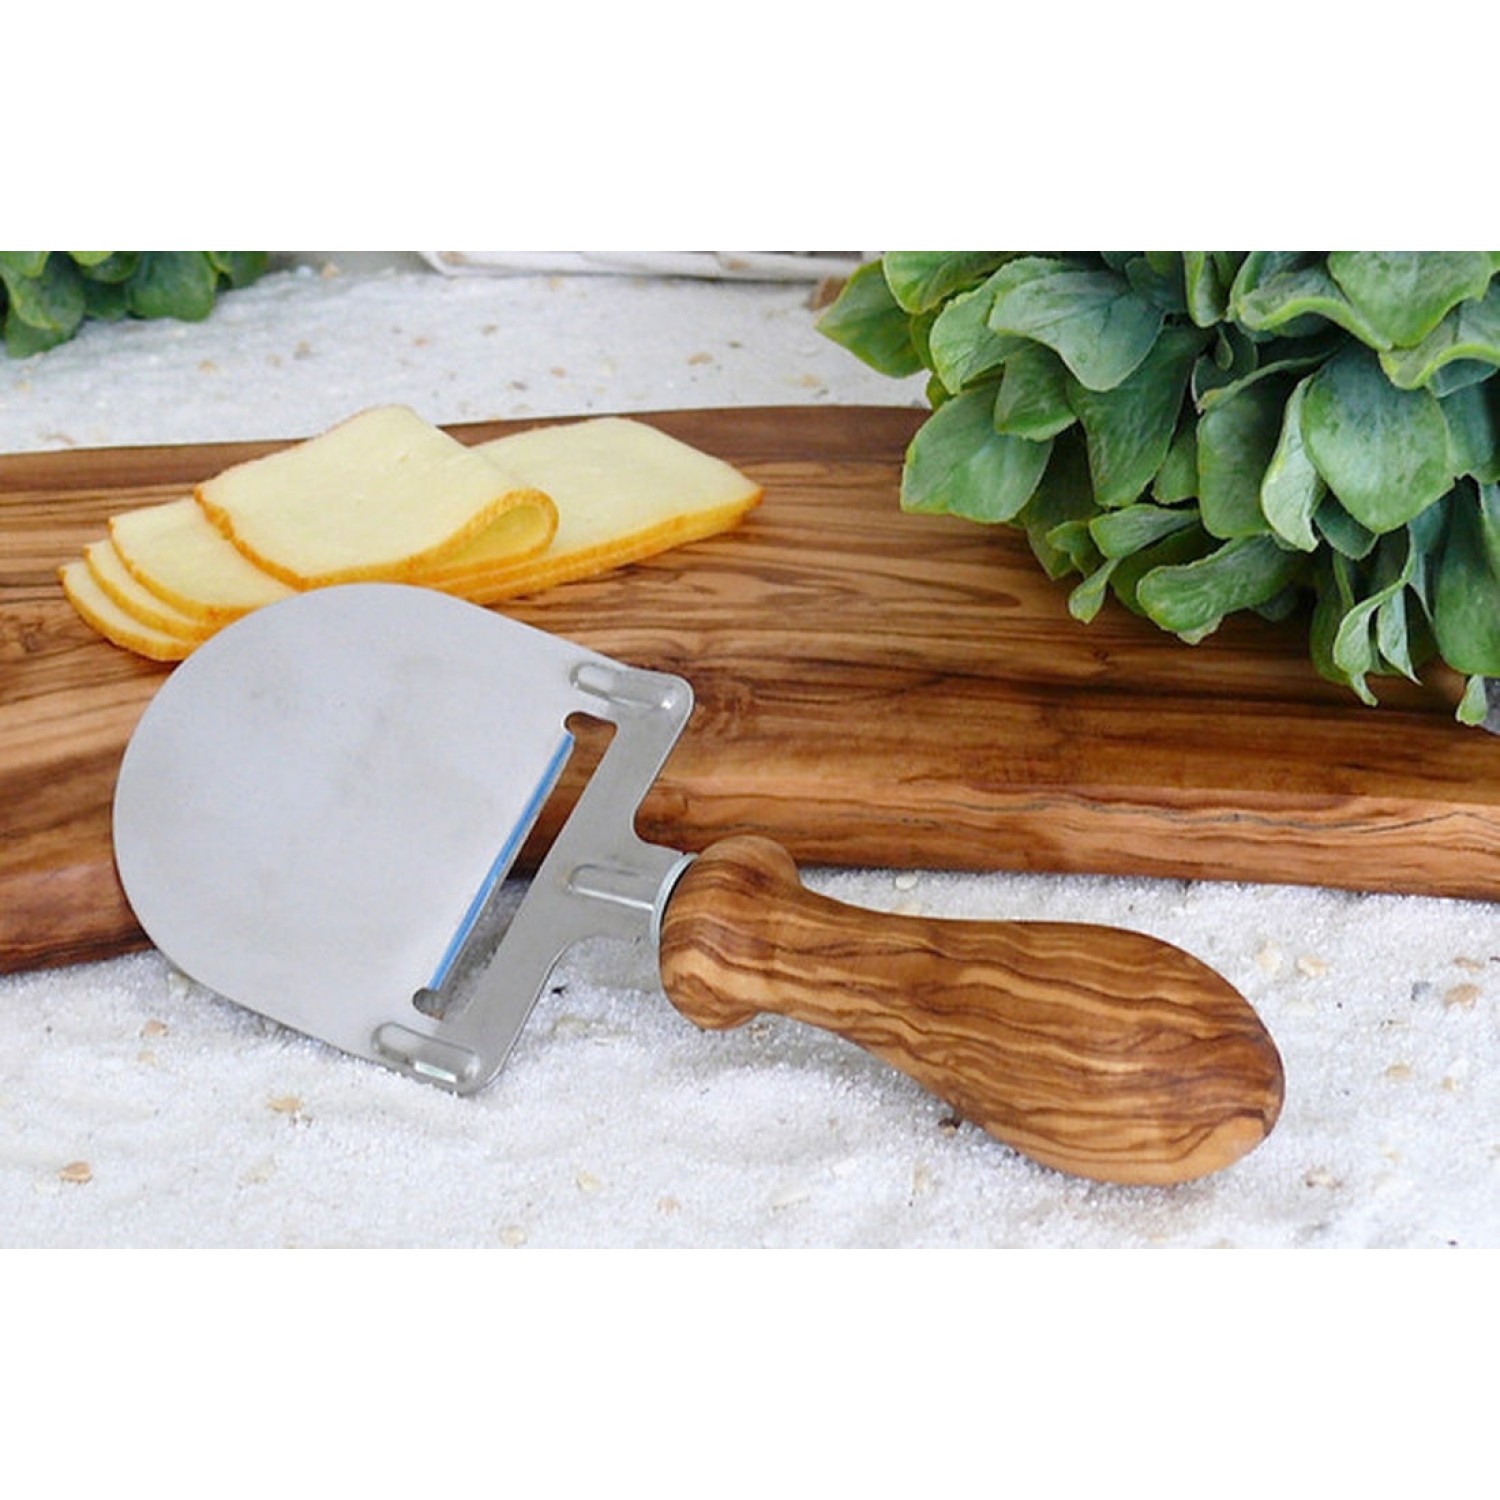 Cheese Slicer, lathed Olive Wood Handle » D.O.M.